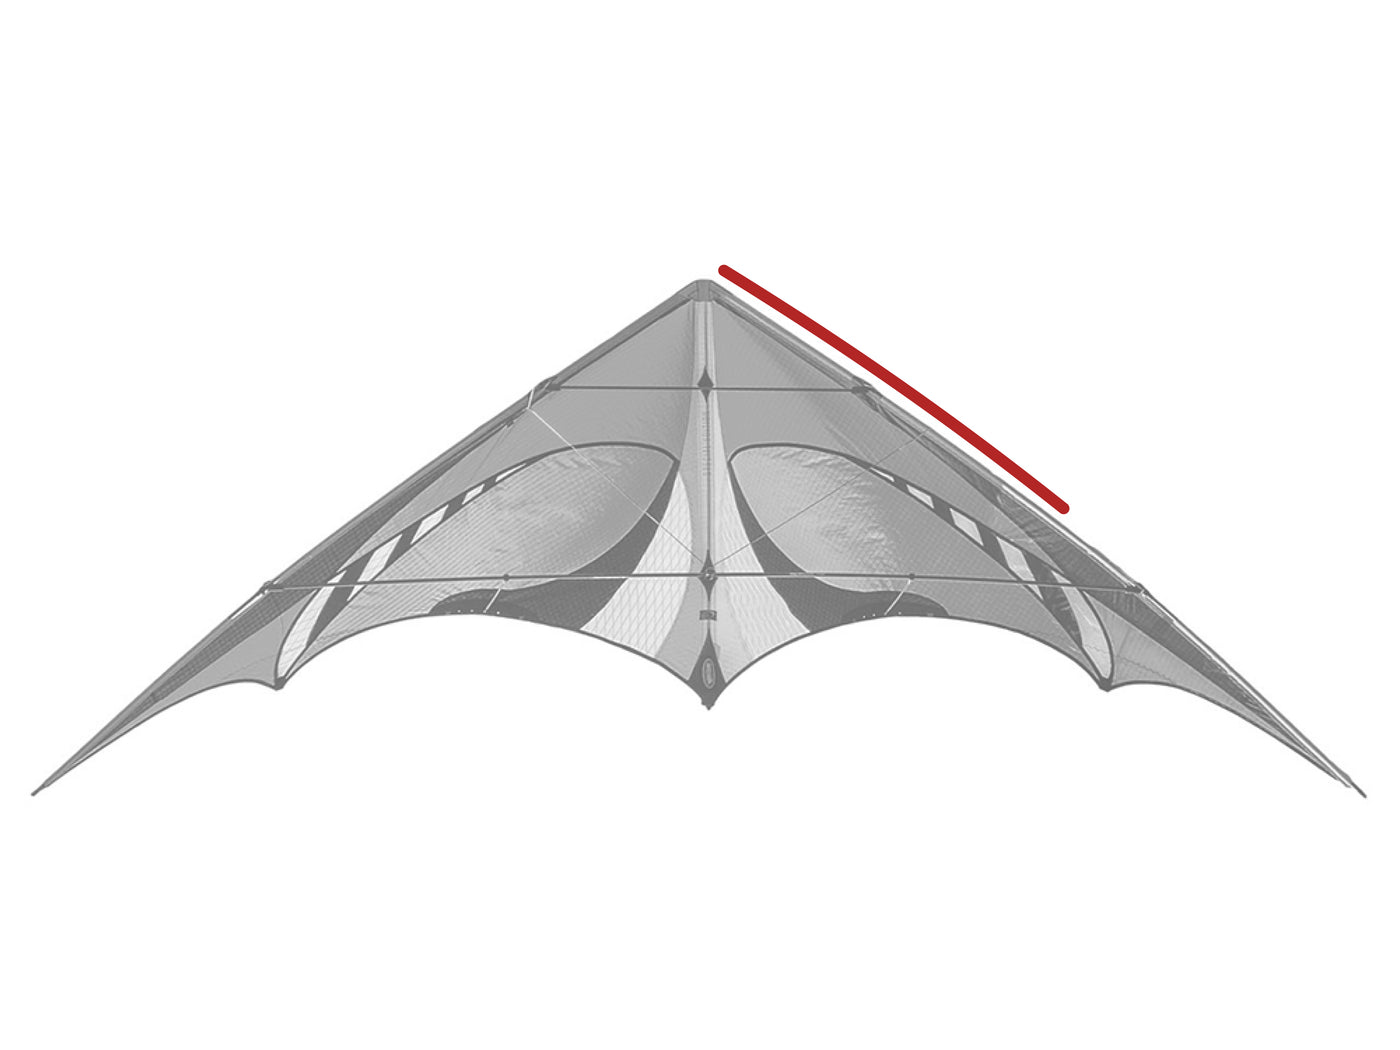 Diagram showing location of the E3 Upper Leading Edge on the kite.